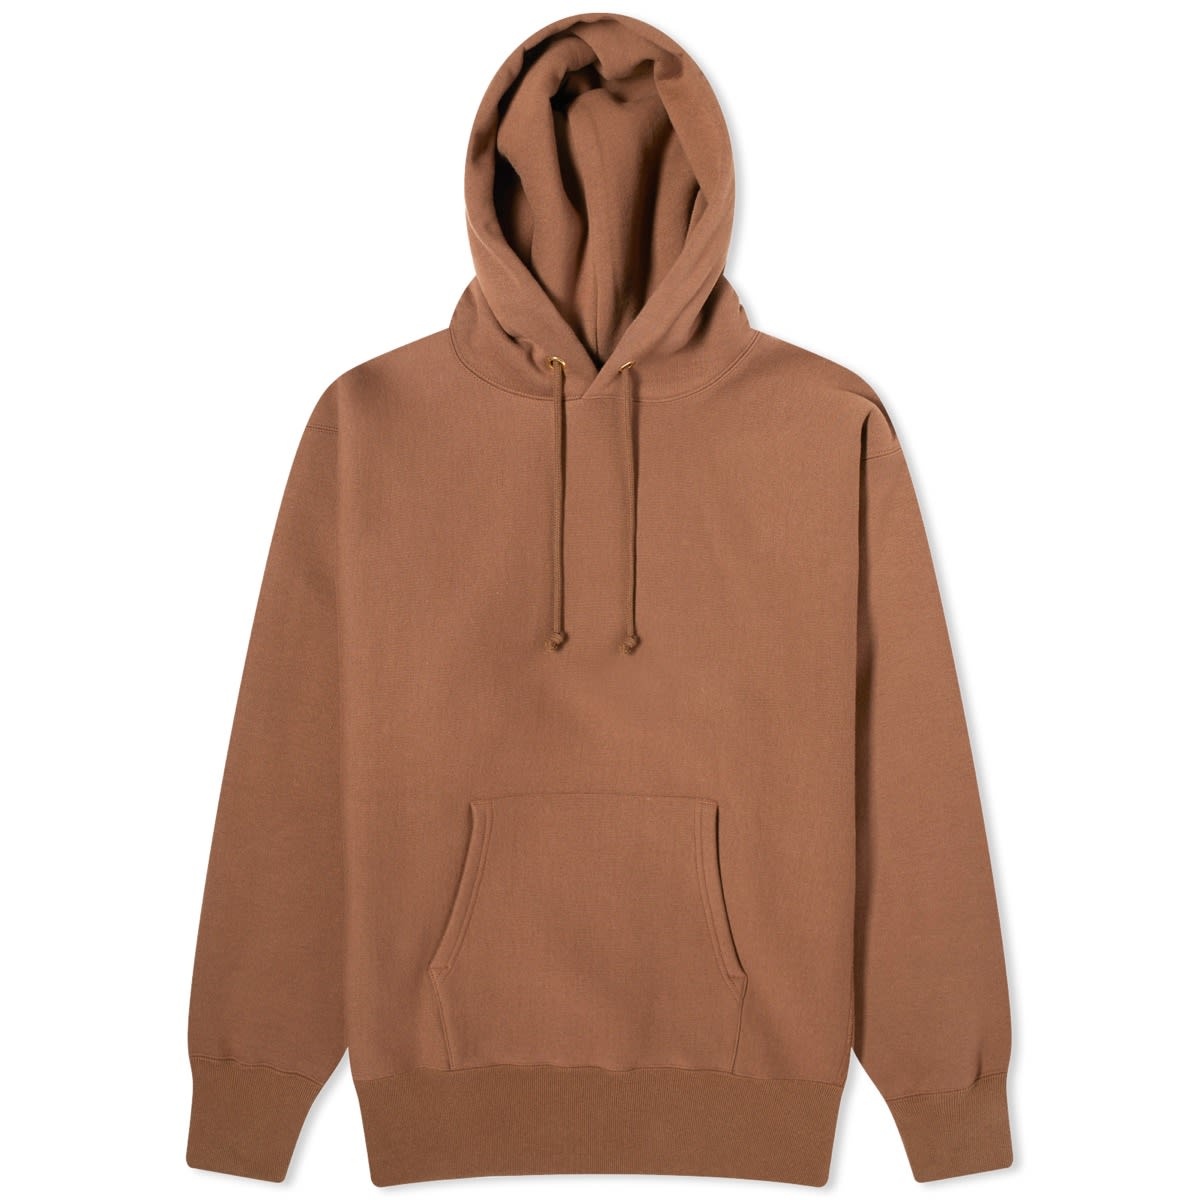 Champion Made in Japan Hoodie - 1